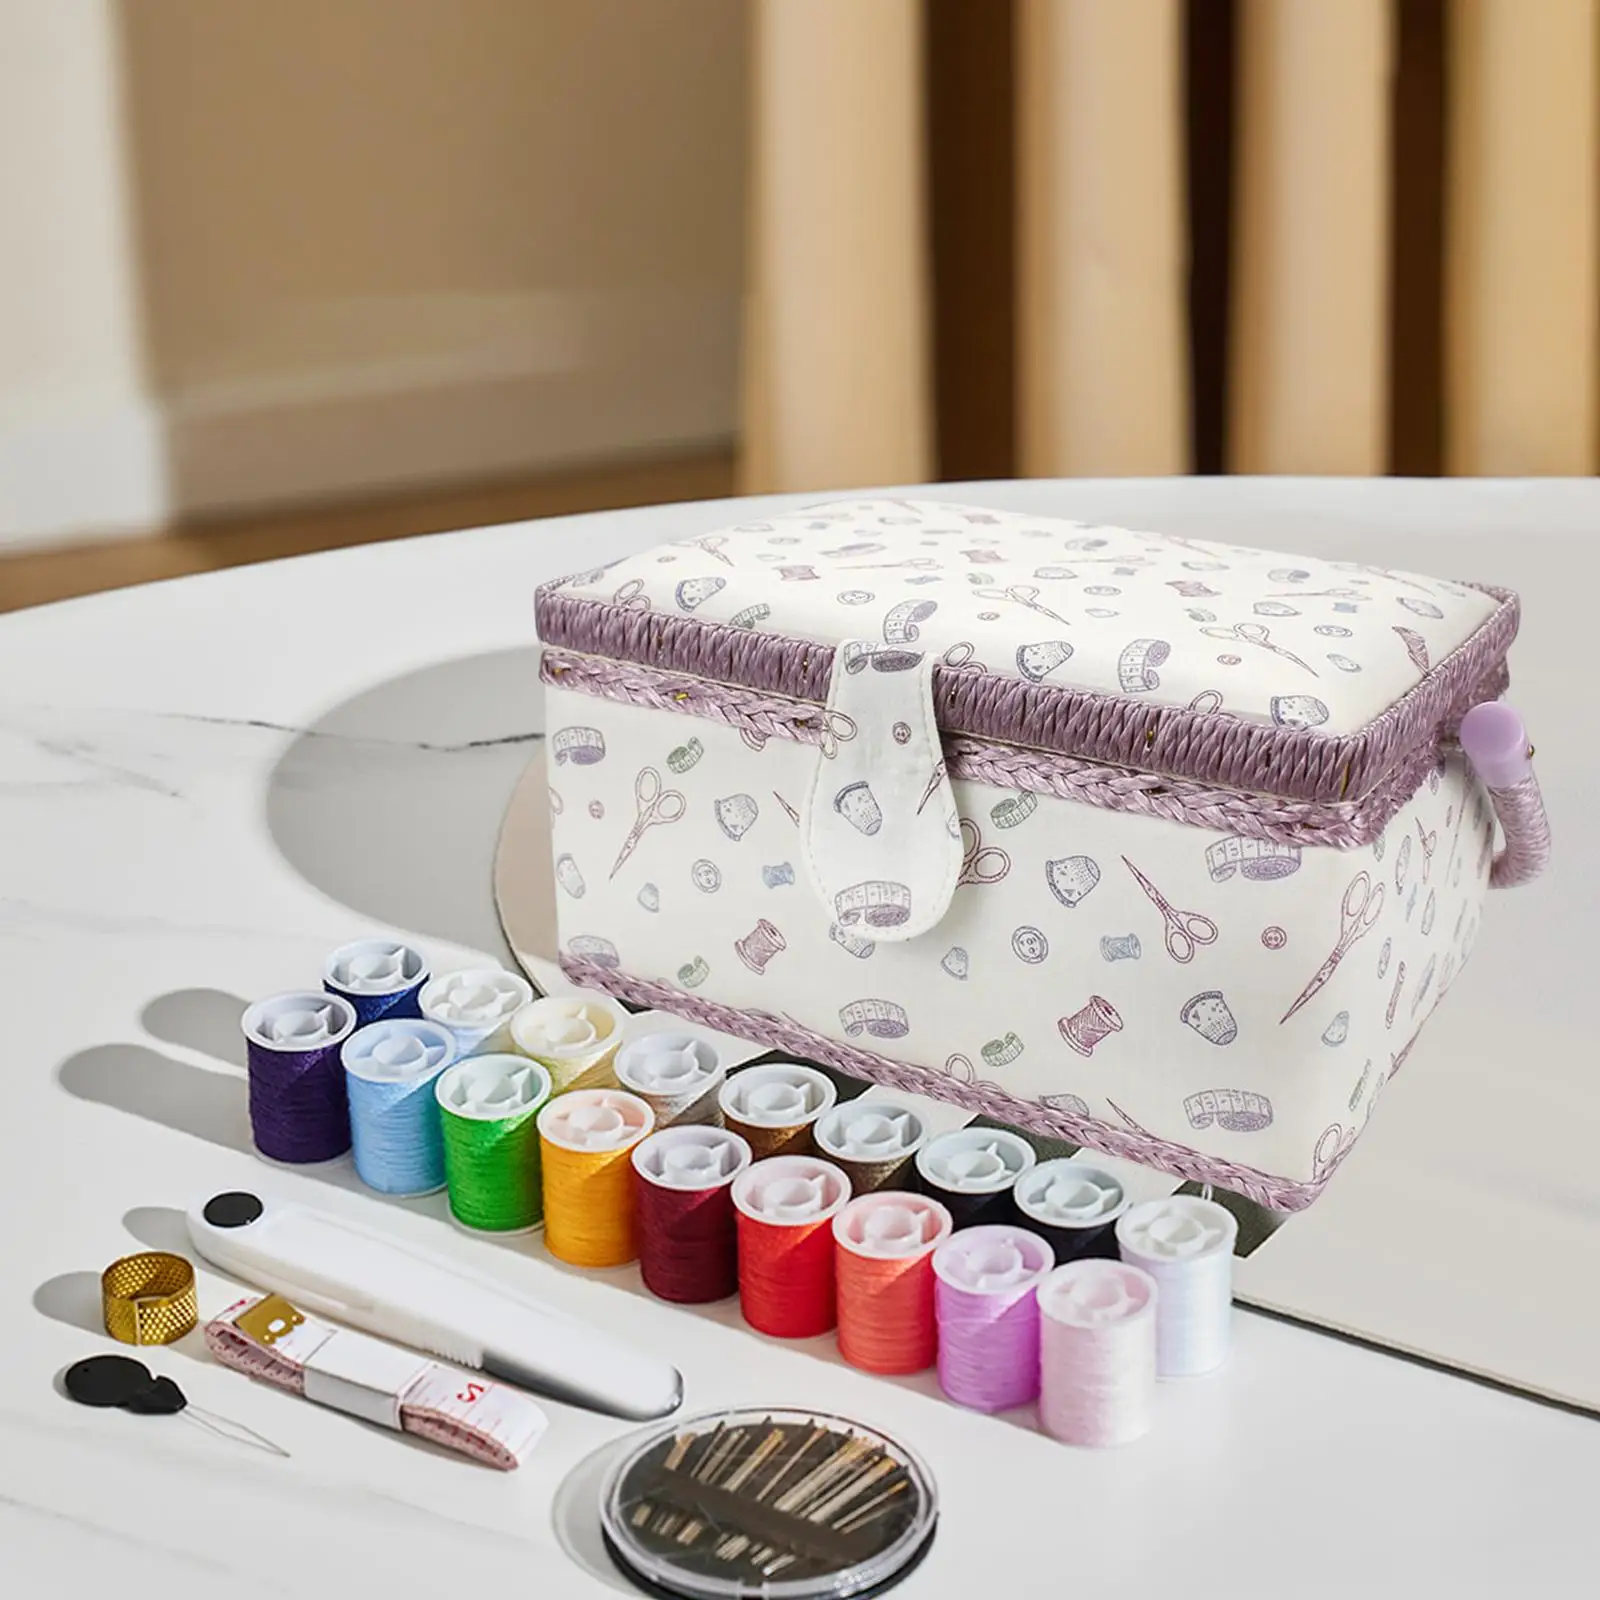 Carrying Case Tools Pouch Accessories Organizer Sewing Basket for Beginners